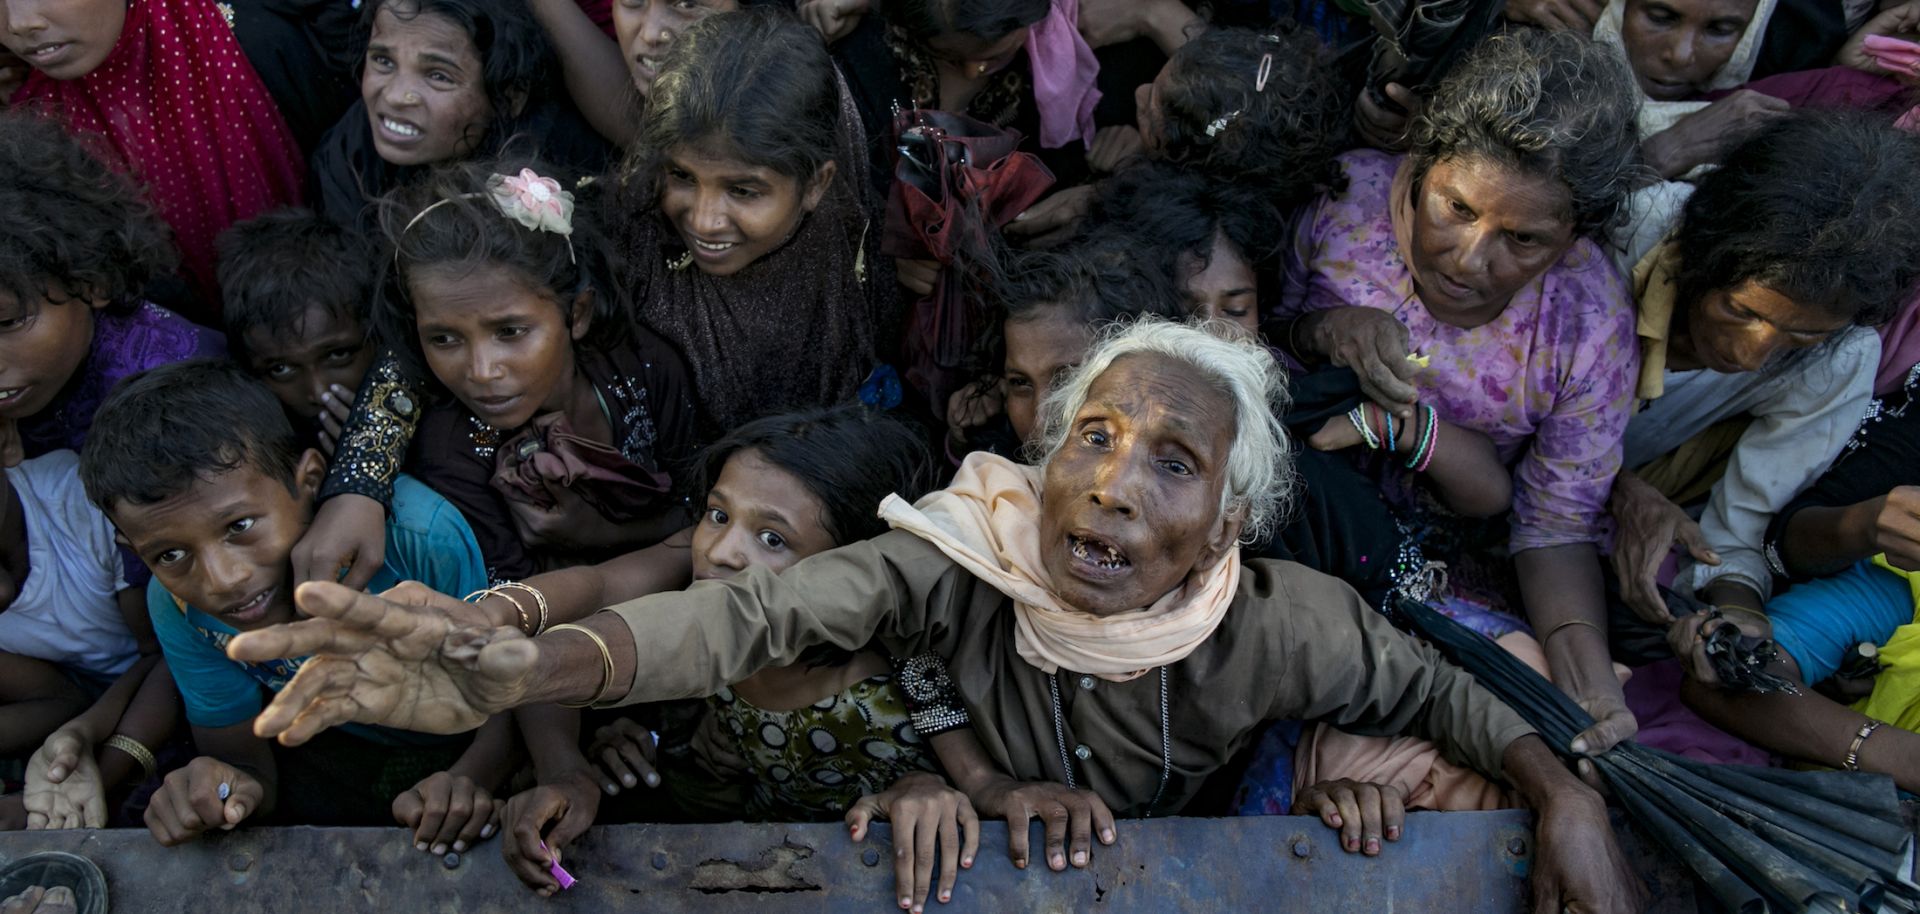 A throng of Rohingya refugees recently arrived in Bangladesh await aid donations.